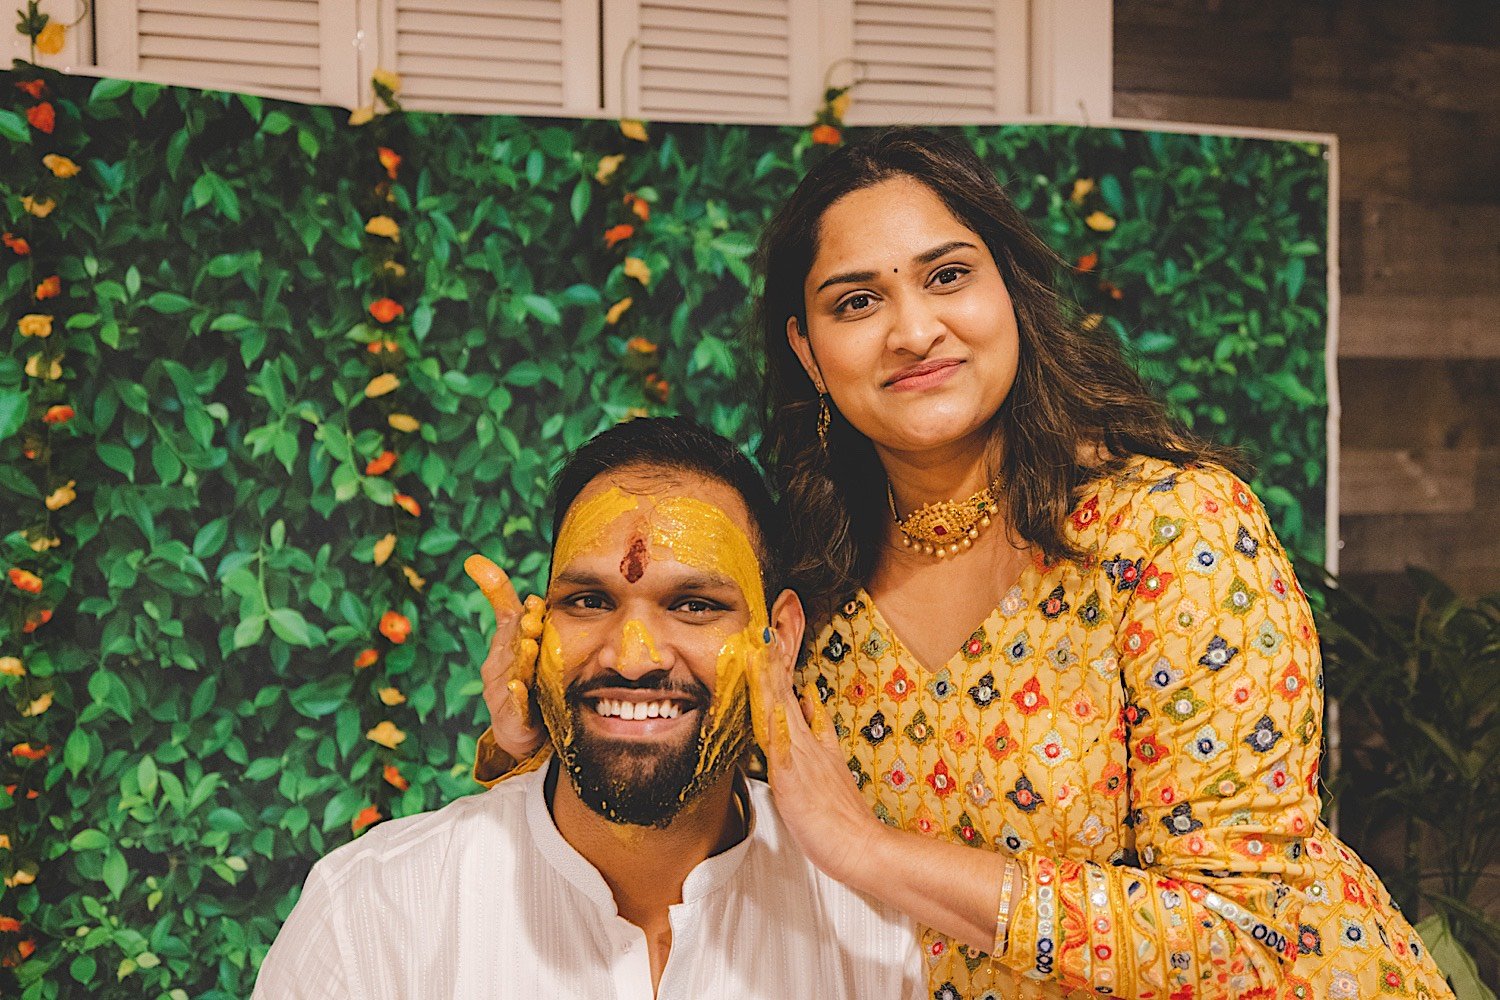 Bride covers grooms face in turmeric during traditional Haldi celebration as they smile at the camera